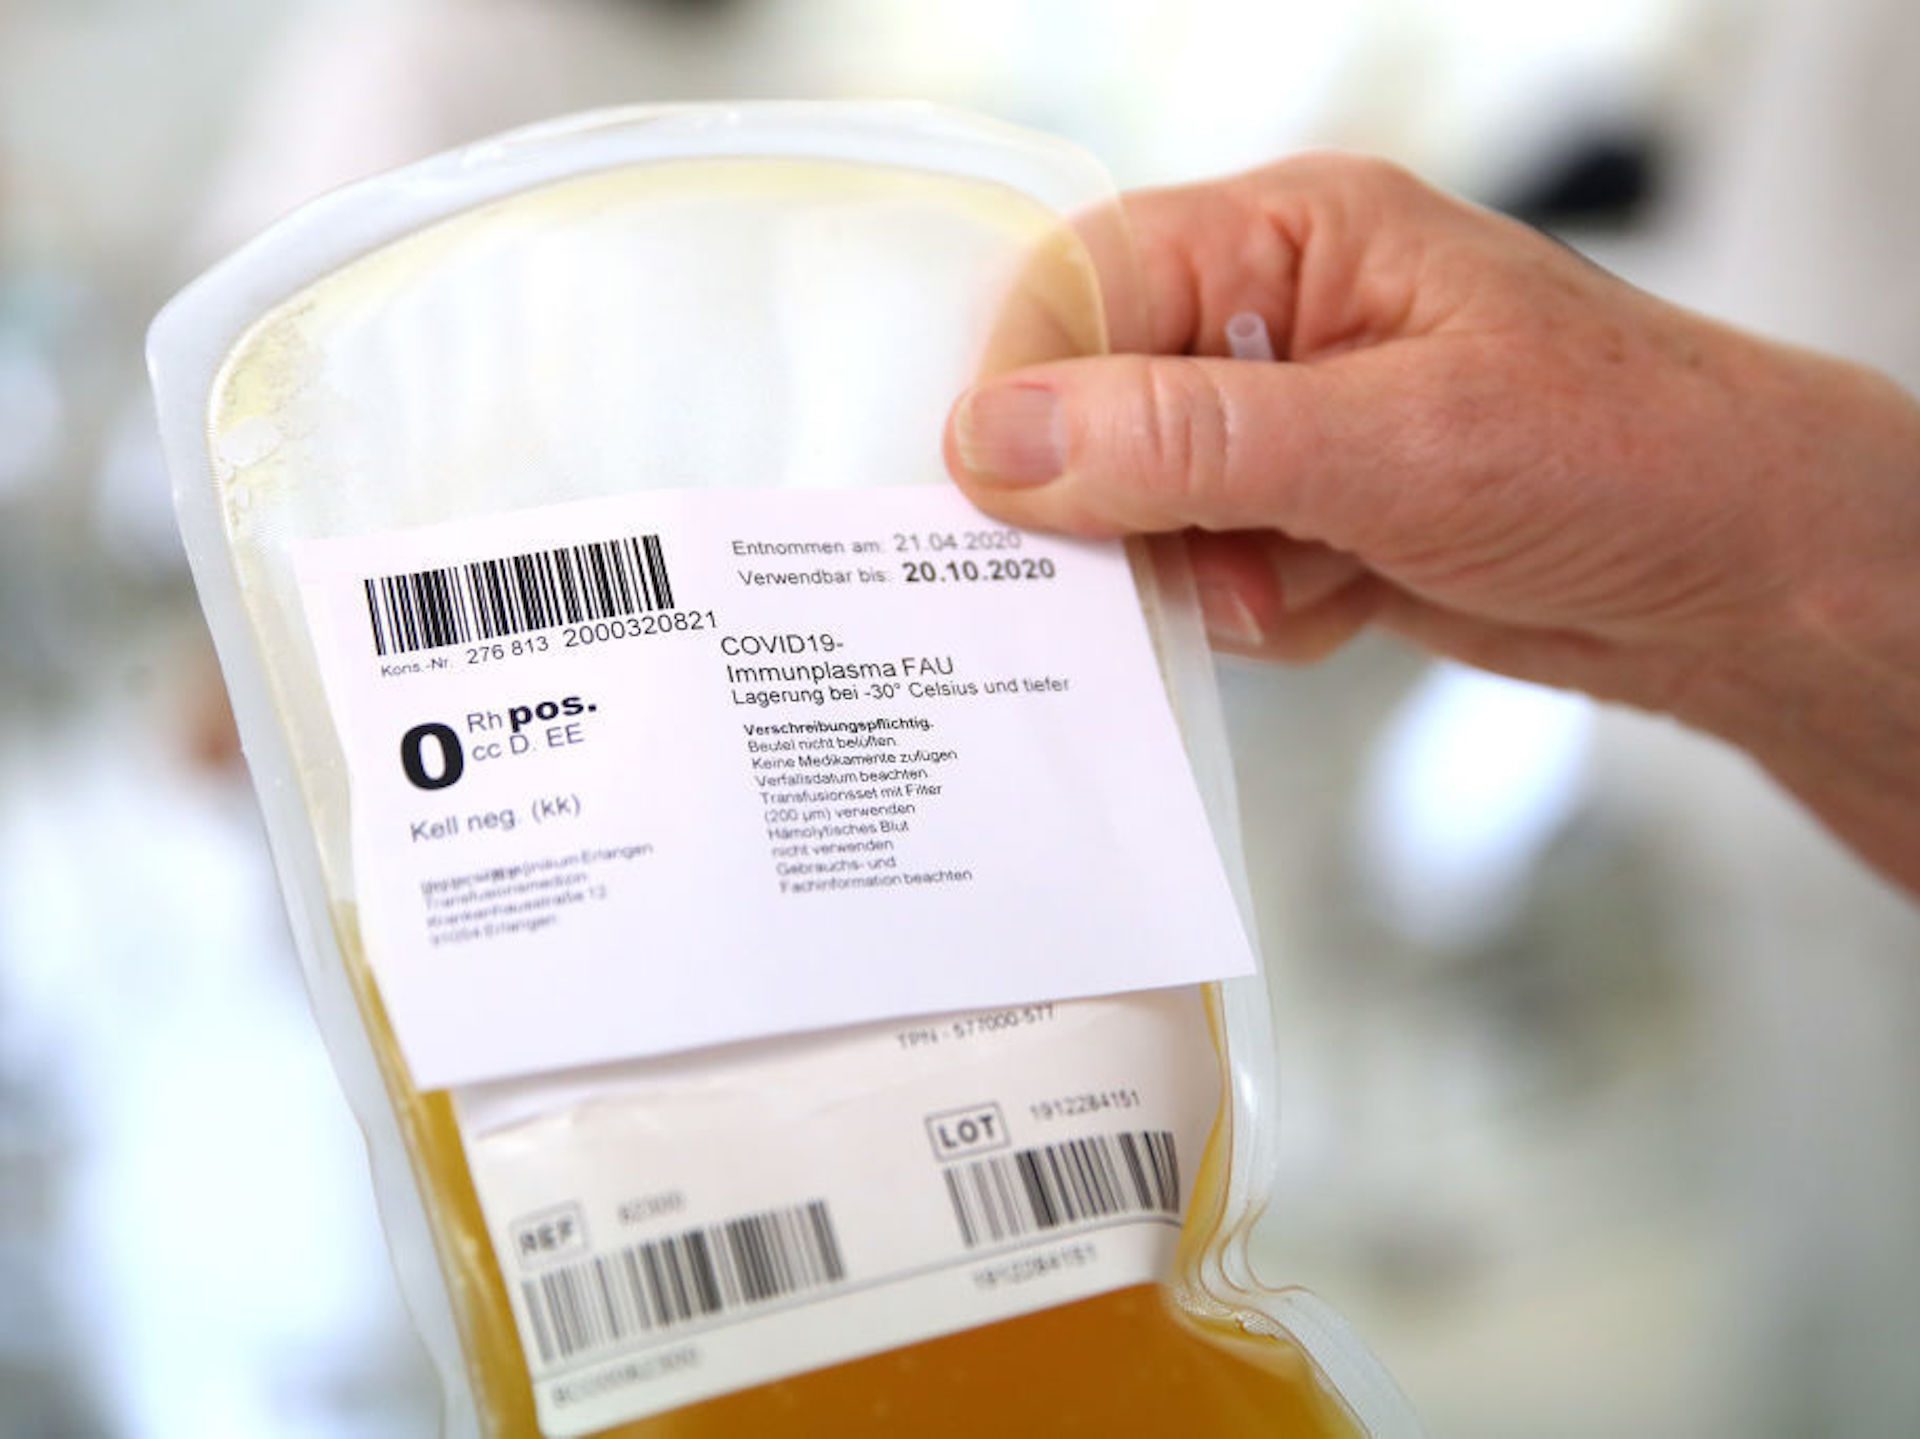 A researcher at the German Center for Immunity Therapy holds a bag containing blood plasma from a recovered COVID-19 patient at the University Hospital Erlangen on April 27, 2020 in Erlangen, Germany. This plasma could be used to treat people with COVID-19.